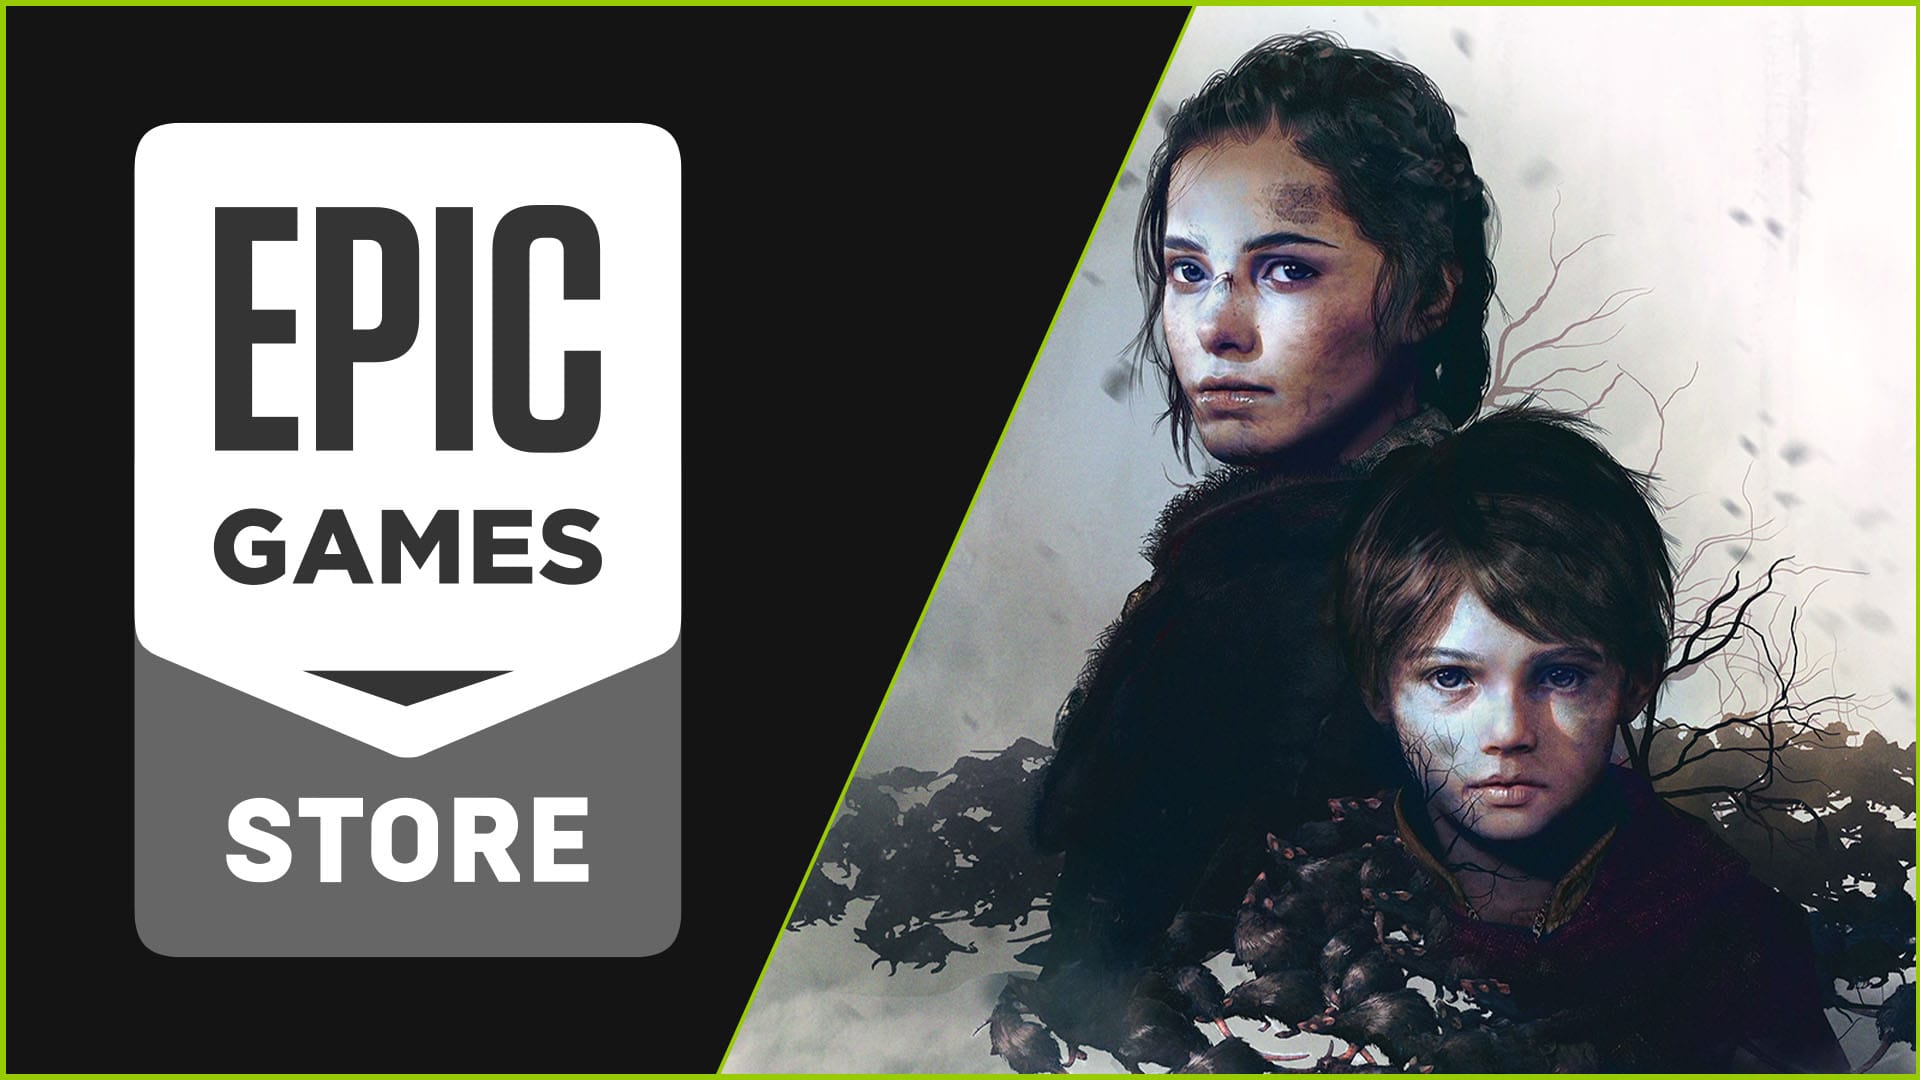 Can PlayStation Free Store Plus Is Tale: Plague | Sequel Get You TechRaptor the Innocence Epic on on Games A as